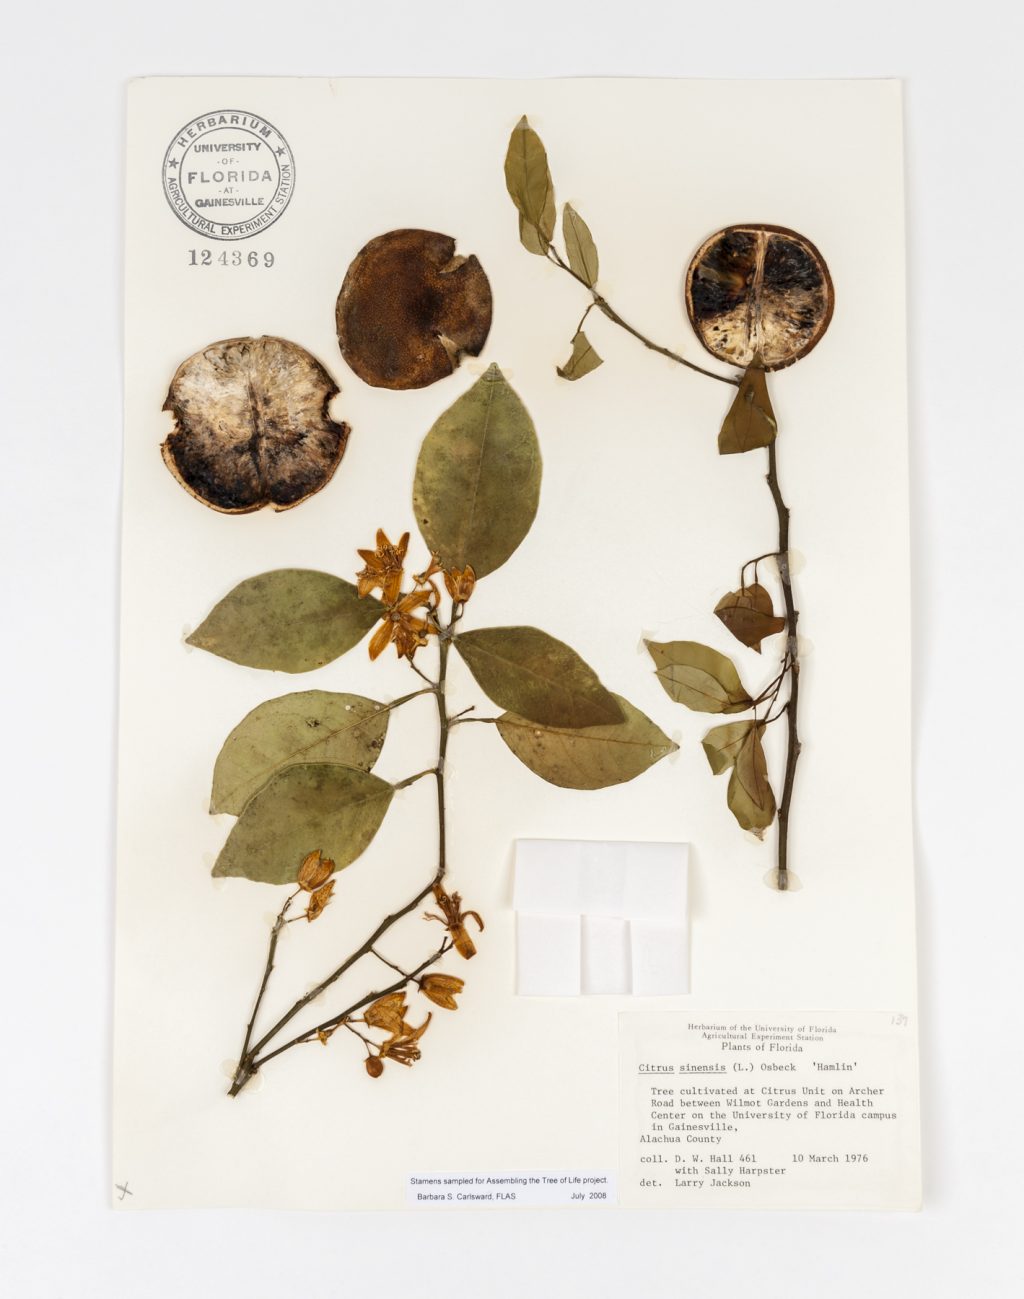 This dried, pressed specimen of a Hamlin Orange tree, including sections of fruit, was collected in 1976 from the citrus research plots here on the UF campus. Florida Museum of Natural History photo by Kristen Grace